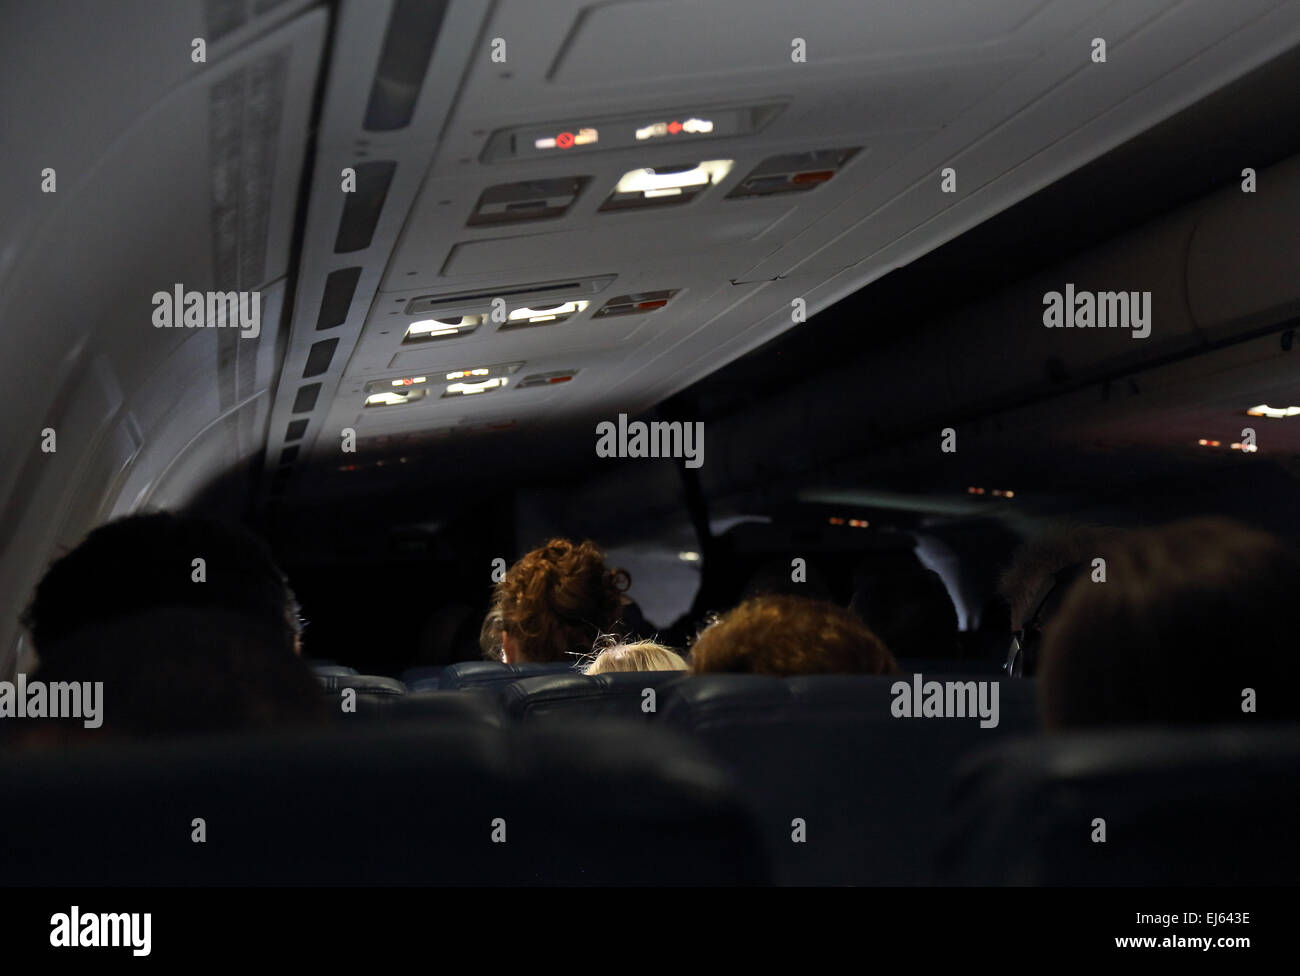 Airplane cabin with airline passengers and dimmed cabin lights during flight Stock Photo